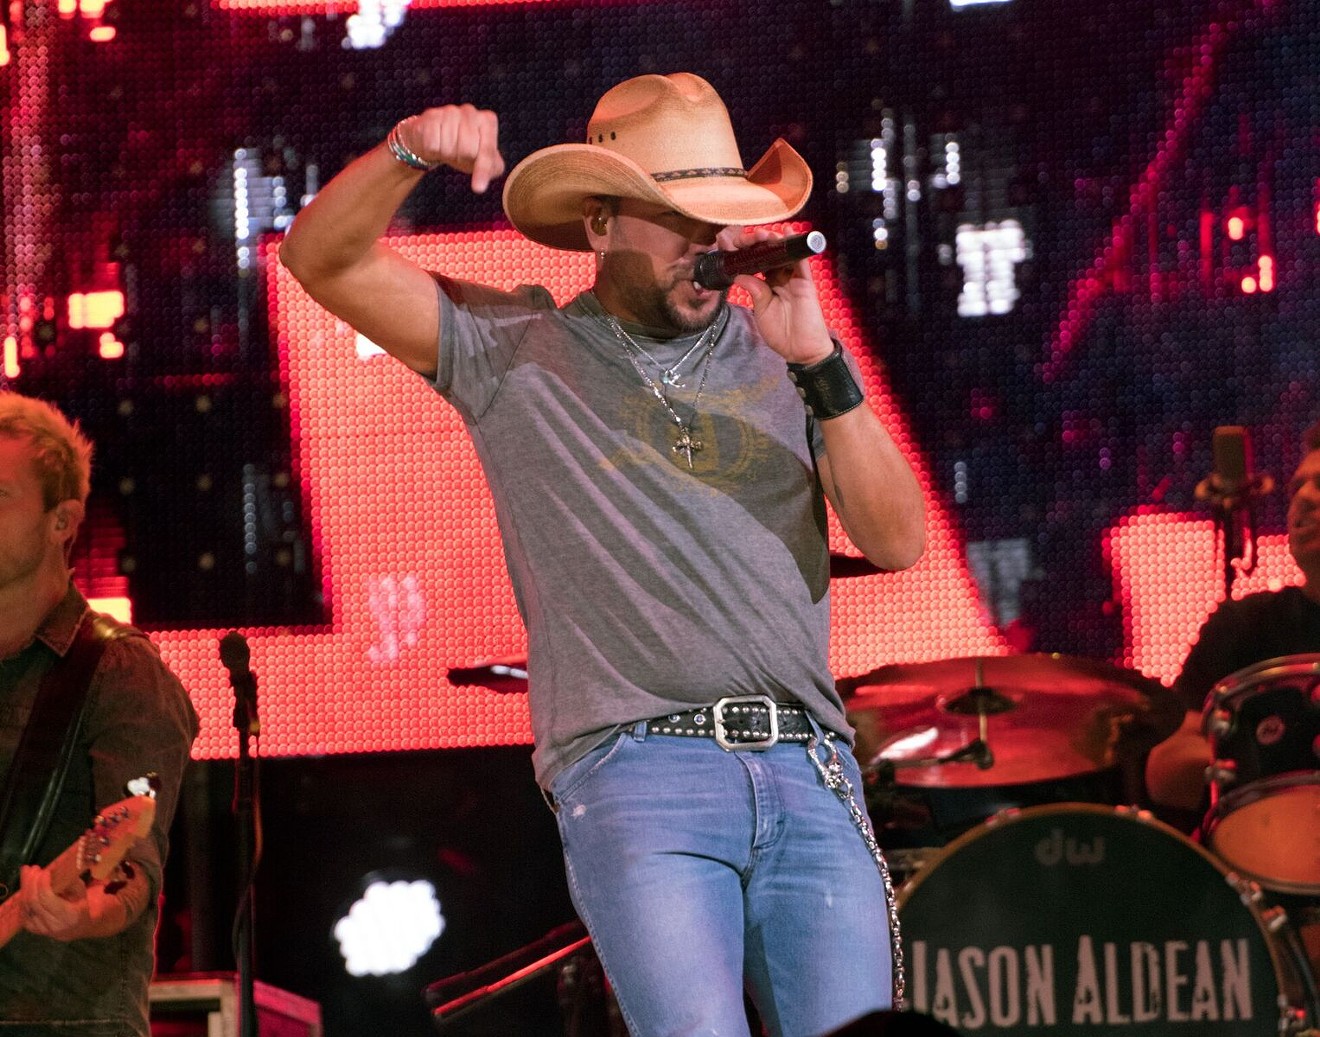 Jason Aldean in one of his more lively moments.